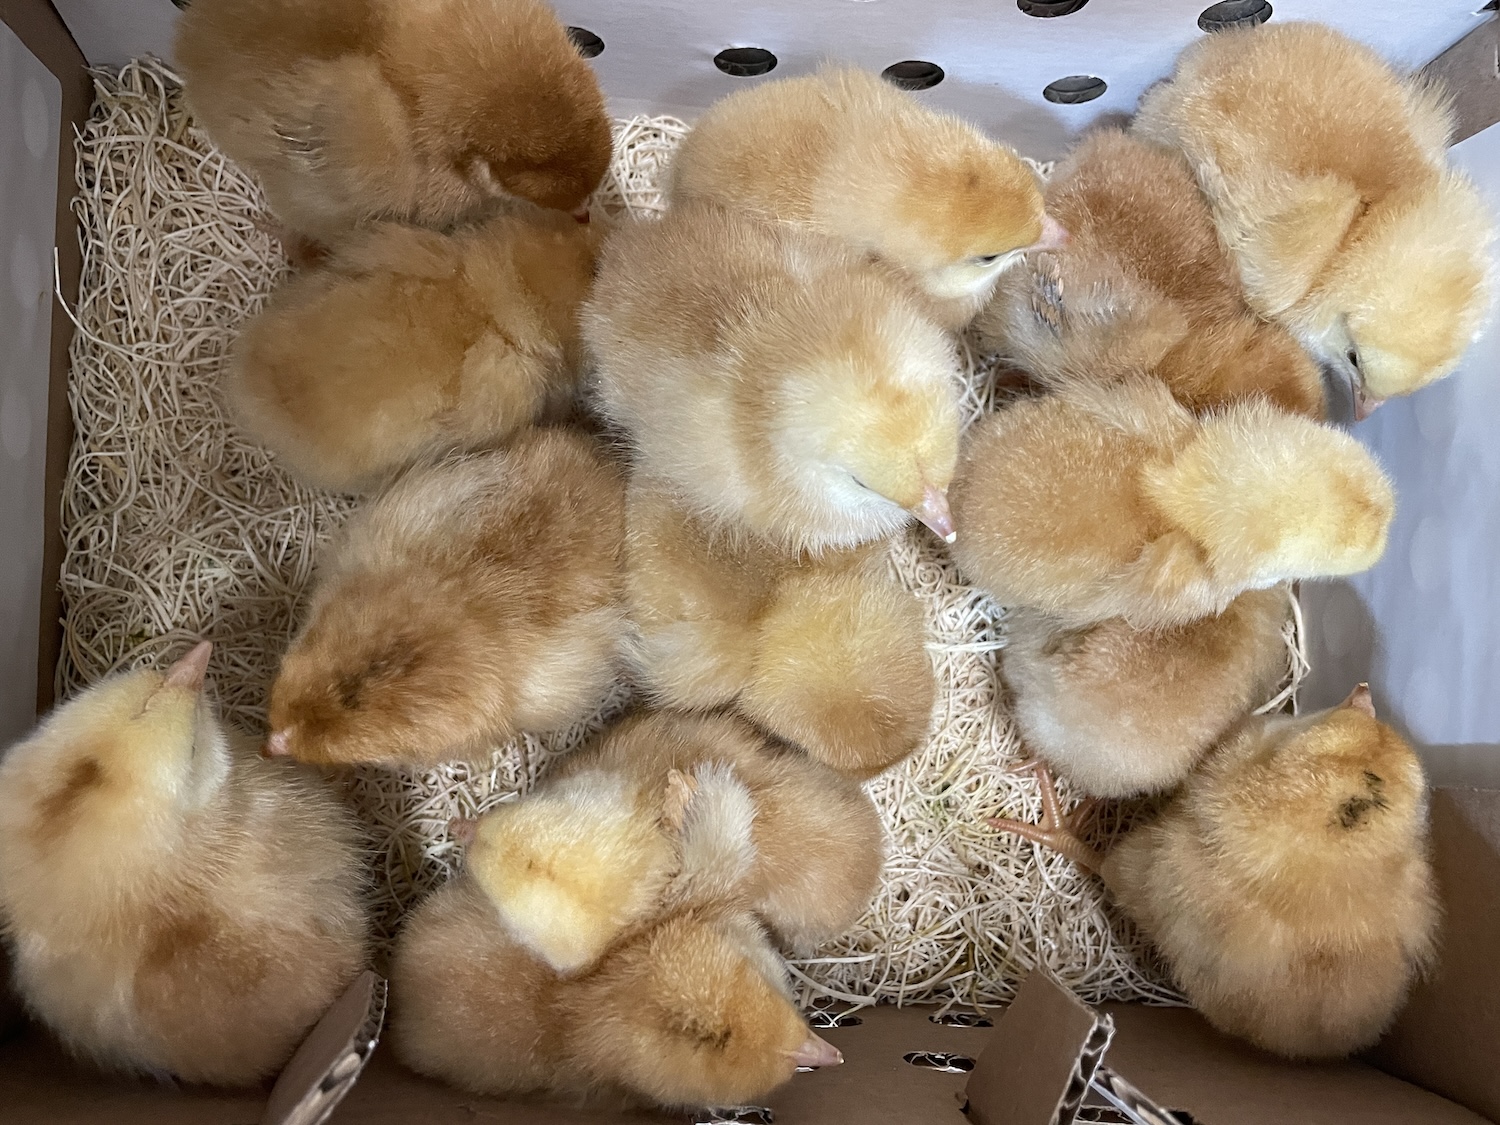 Day old ranger chicks in a box from the mail